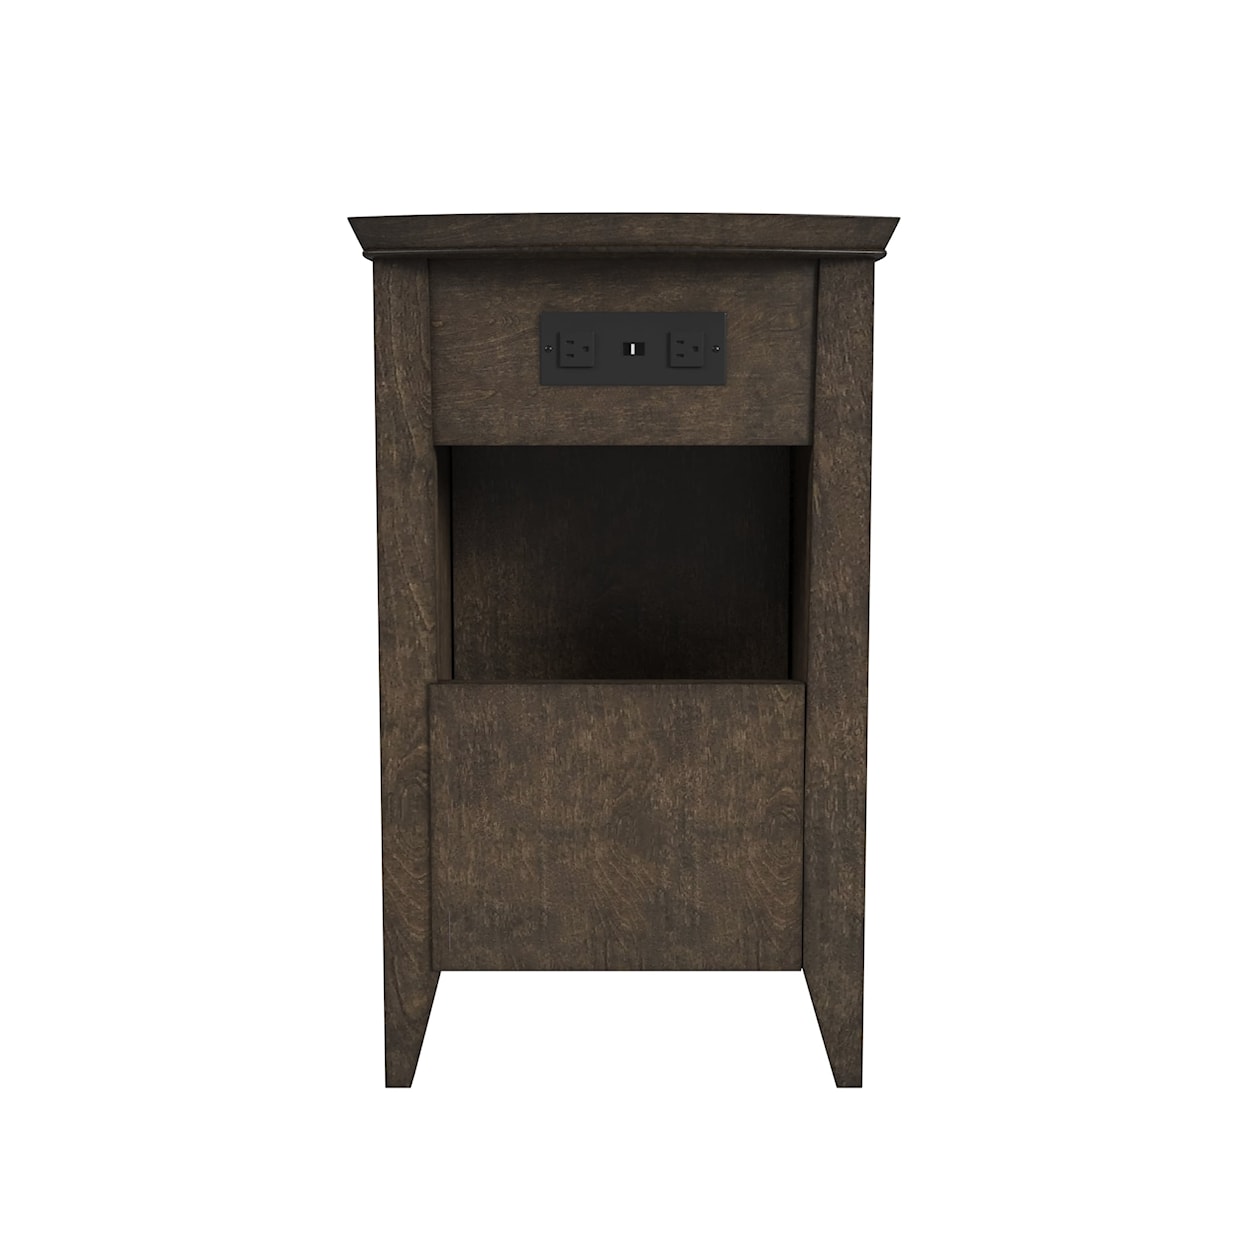 Null Furniture Woodmill Chairside Table Cabinet